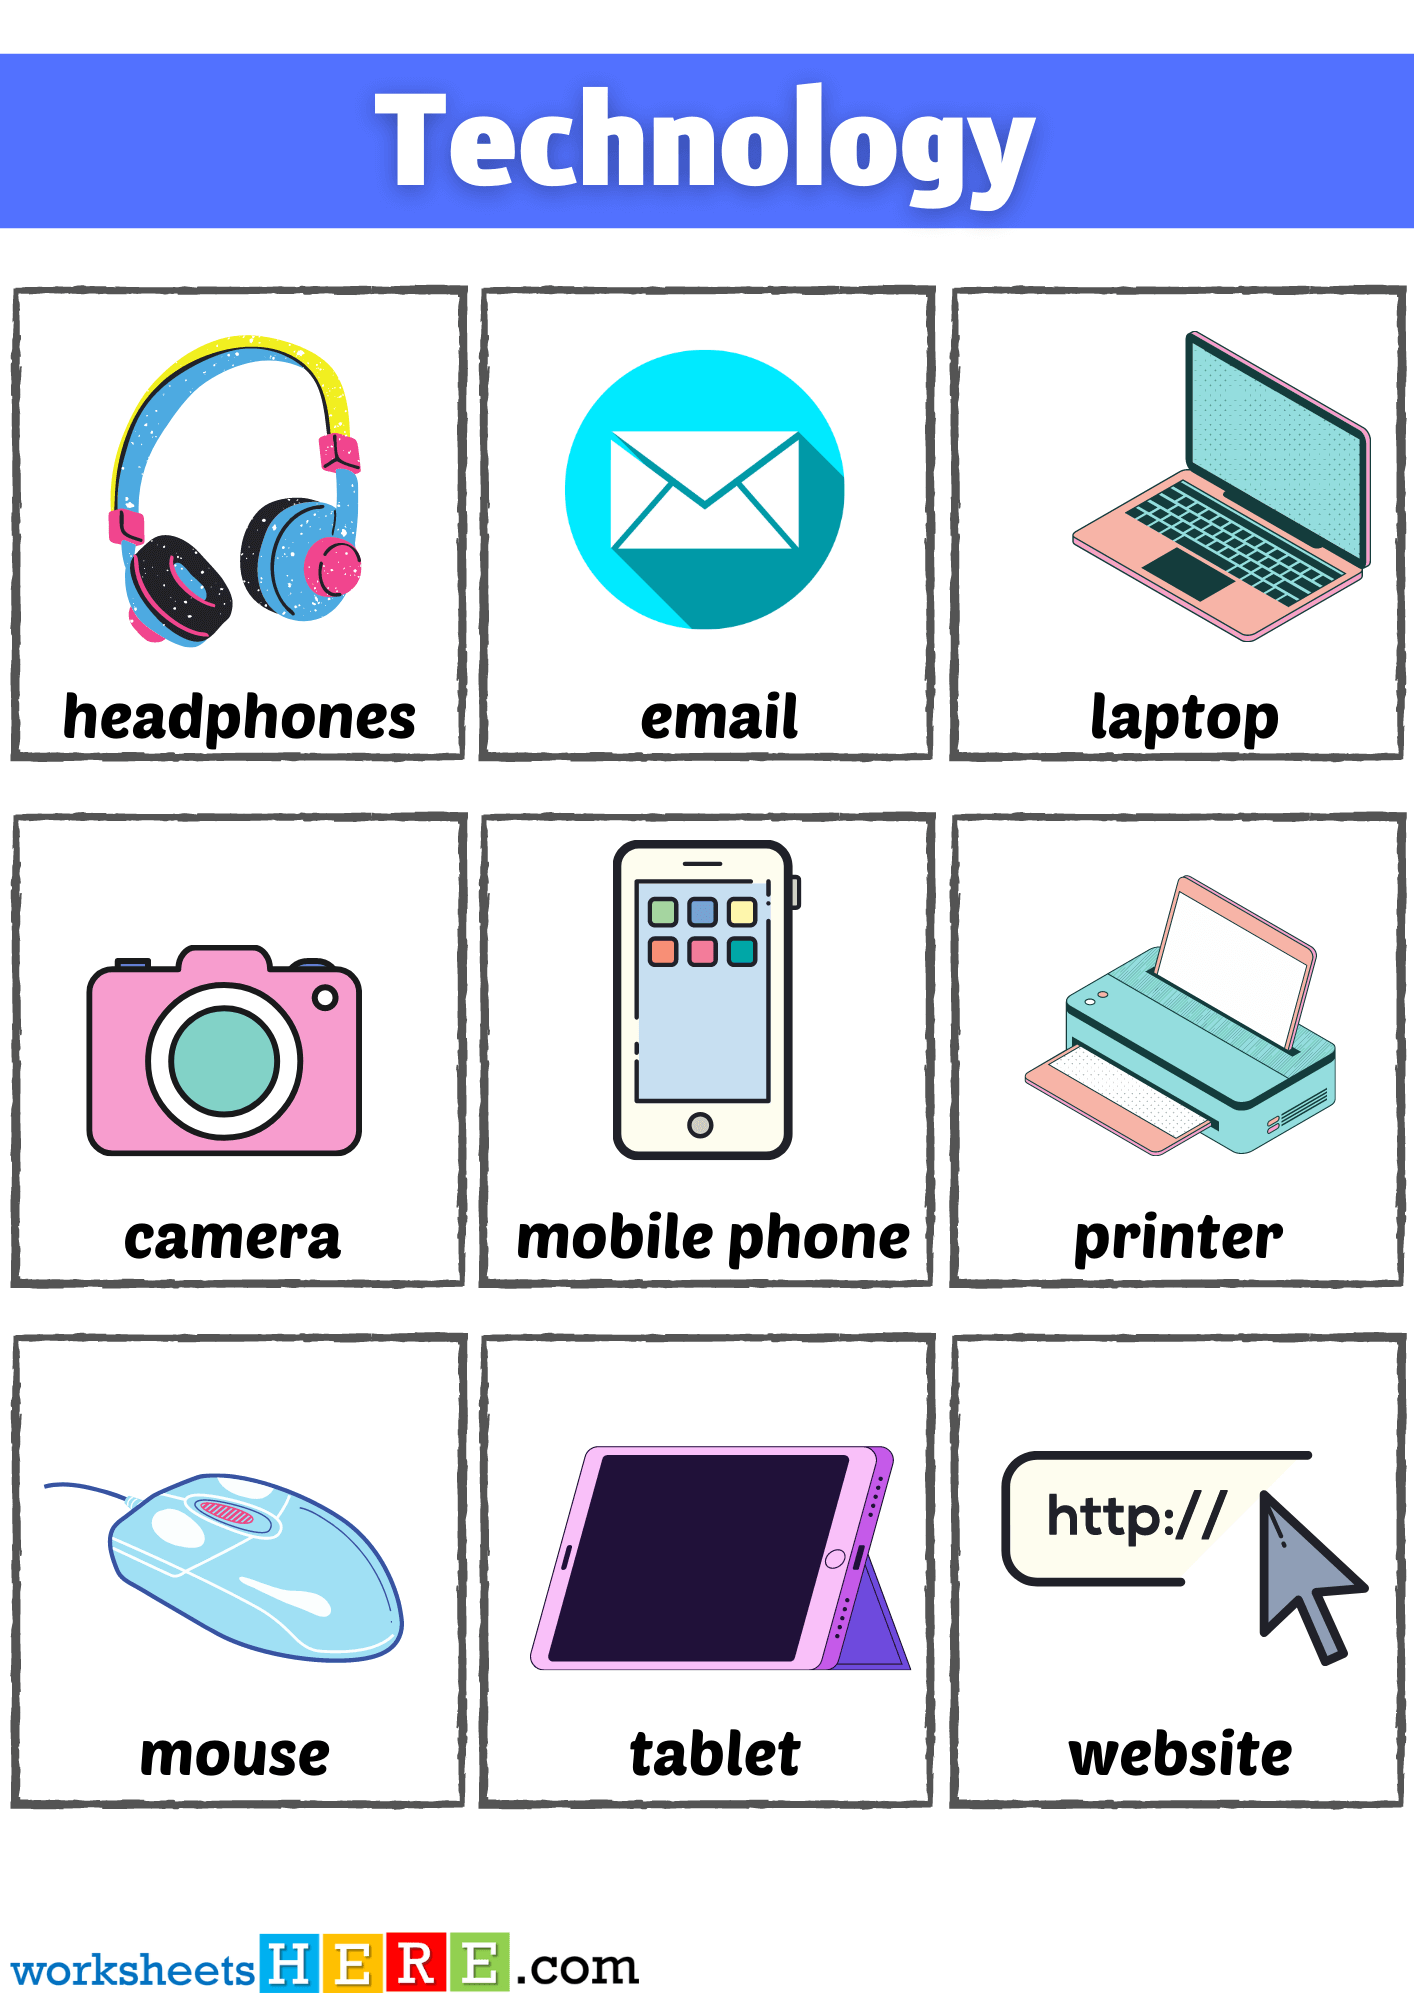 Technology Words Flashcards, Technology Related Words List with Pictures Worksheets